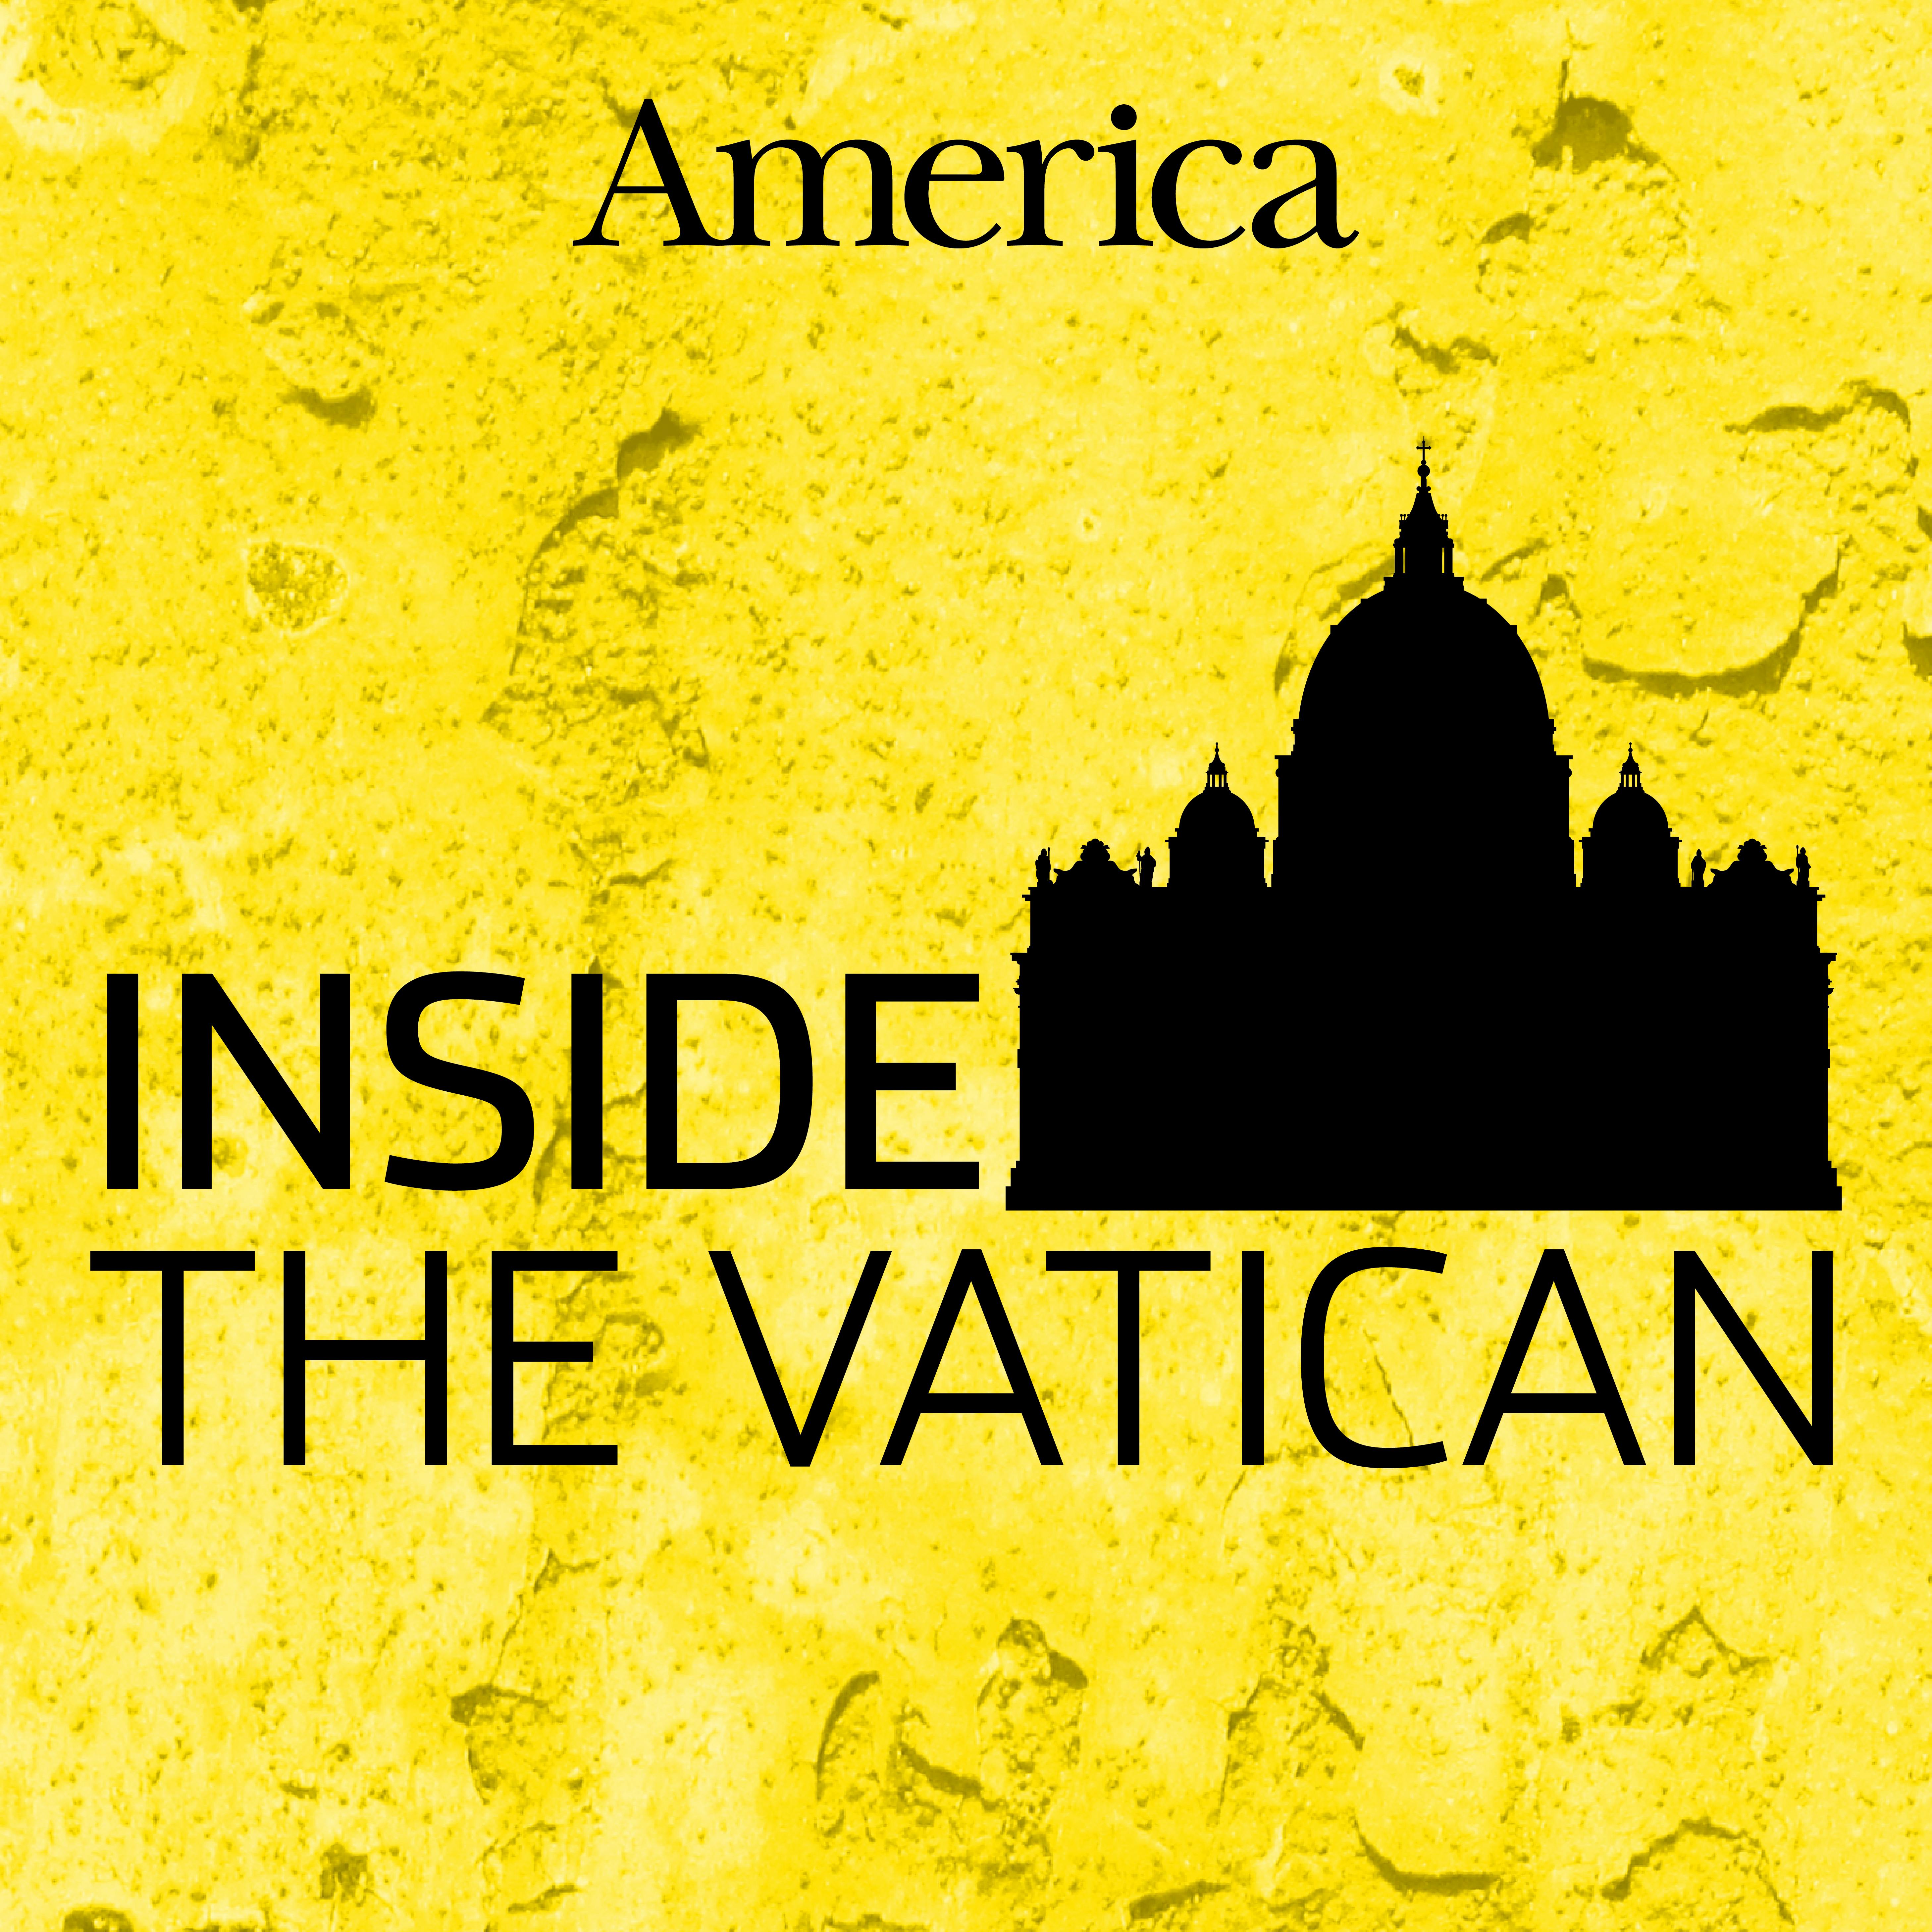 Can Pope Francis’ critics swing the next conclave?